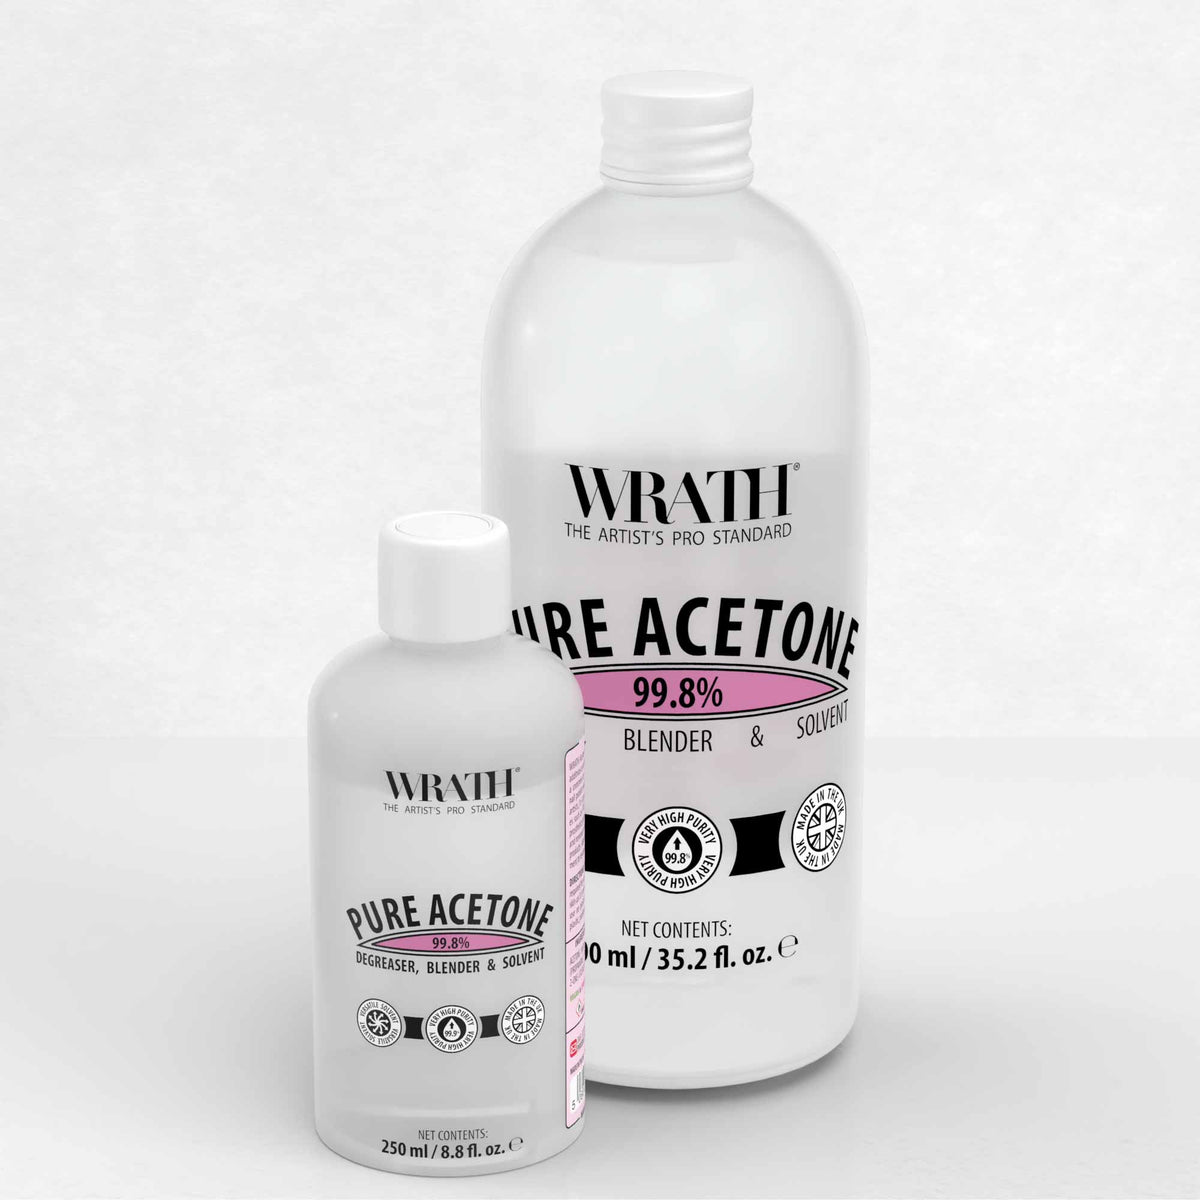 WRATH Pure Acetone 99.8% - Solvent &amp; Degreaser